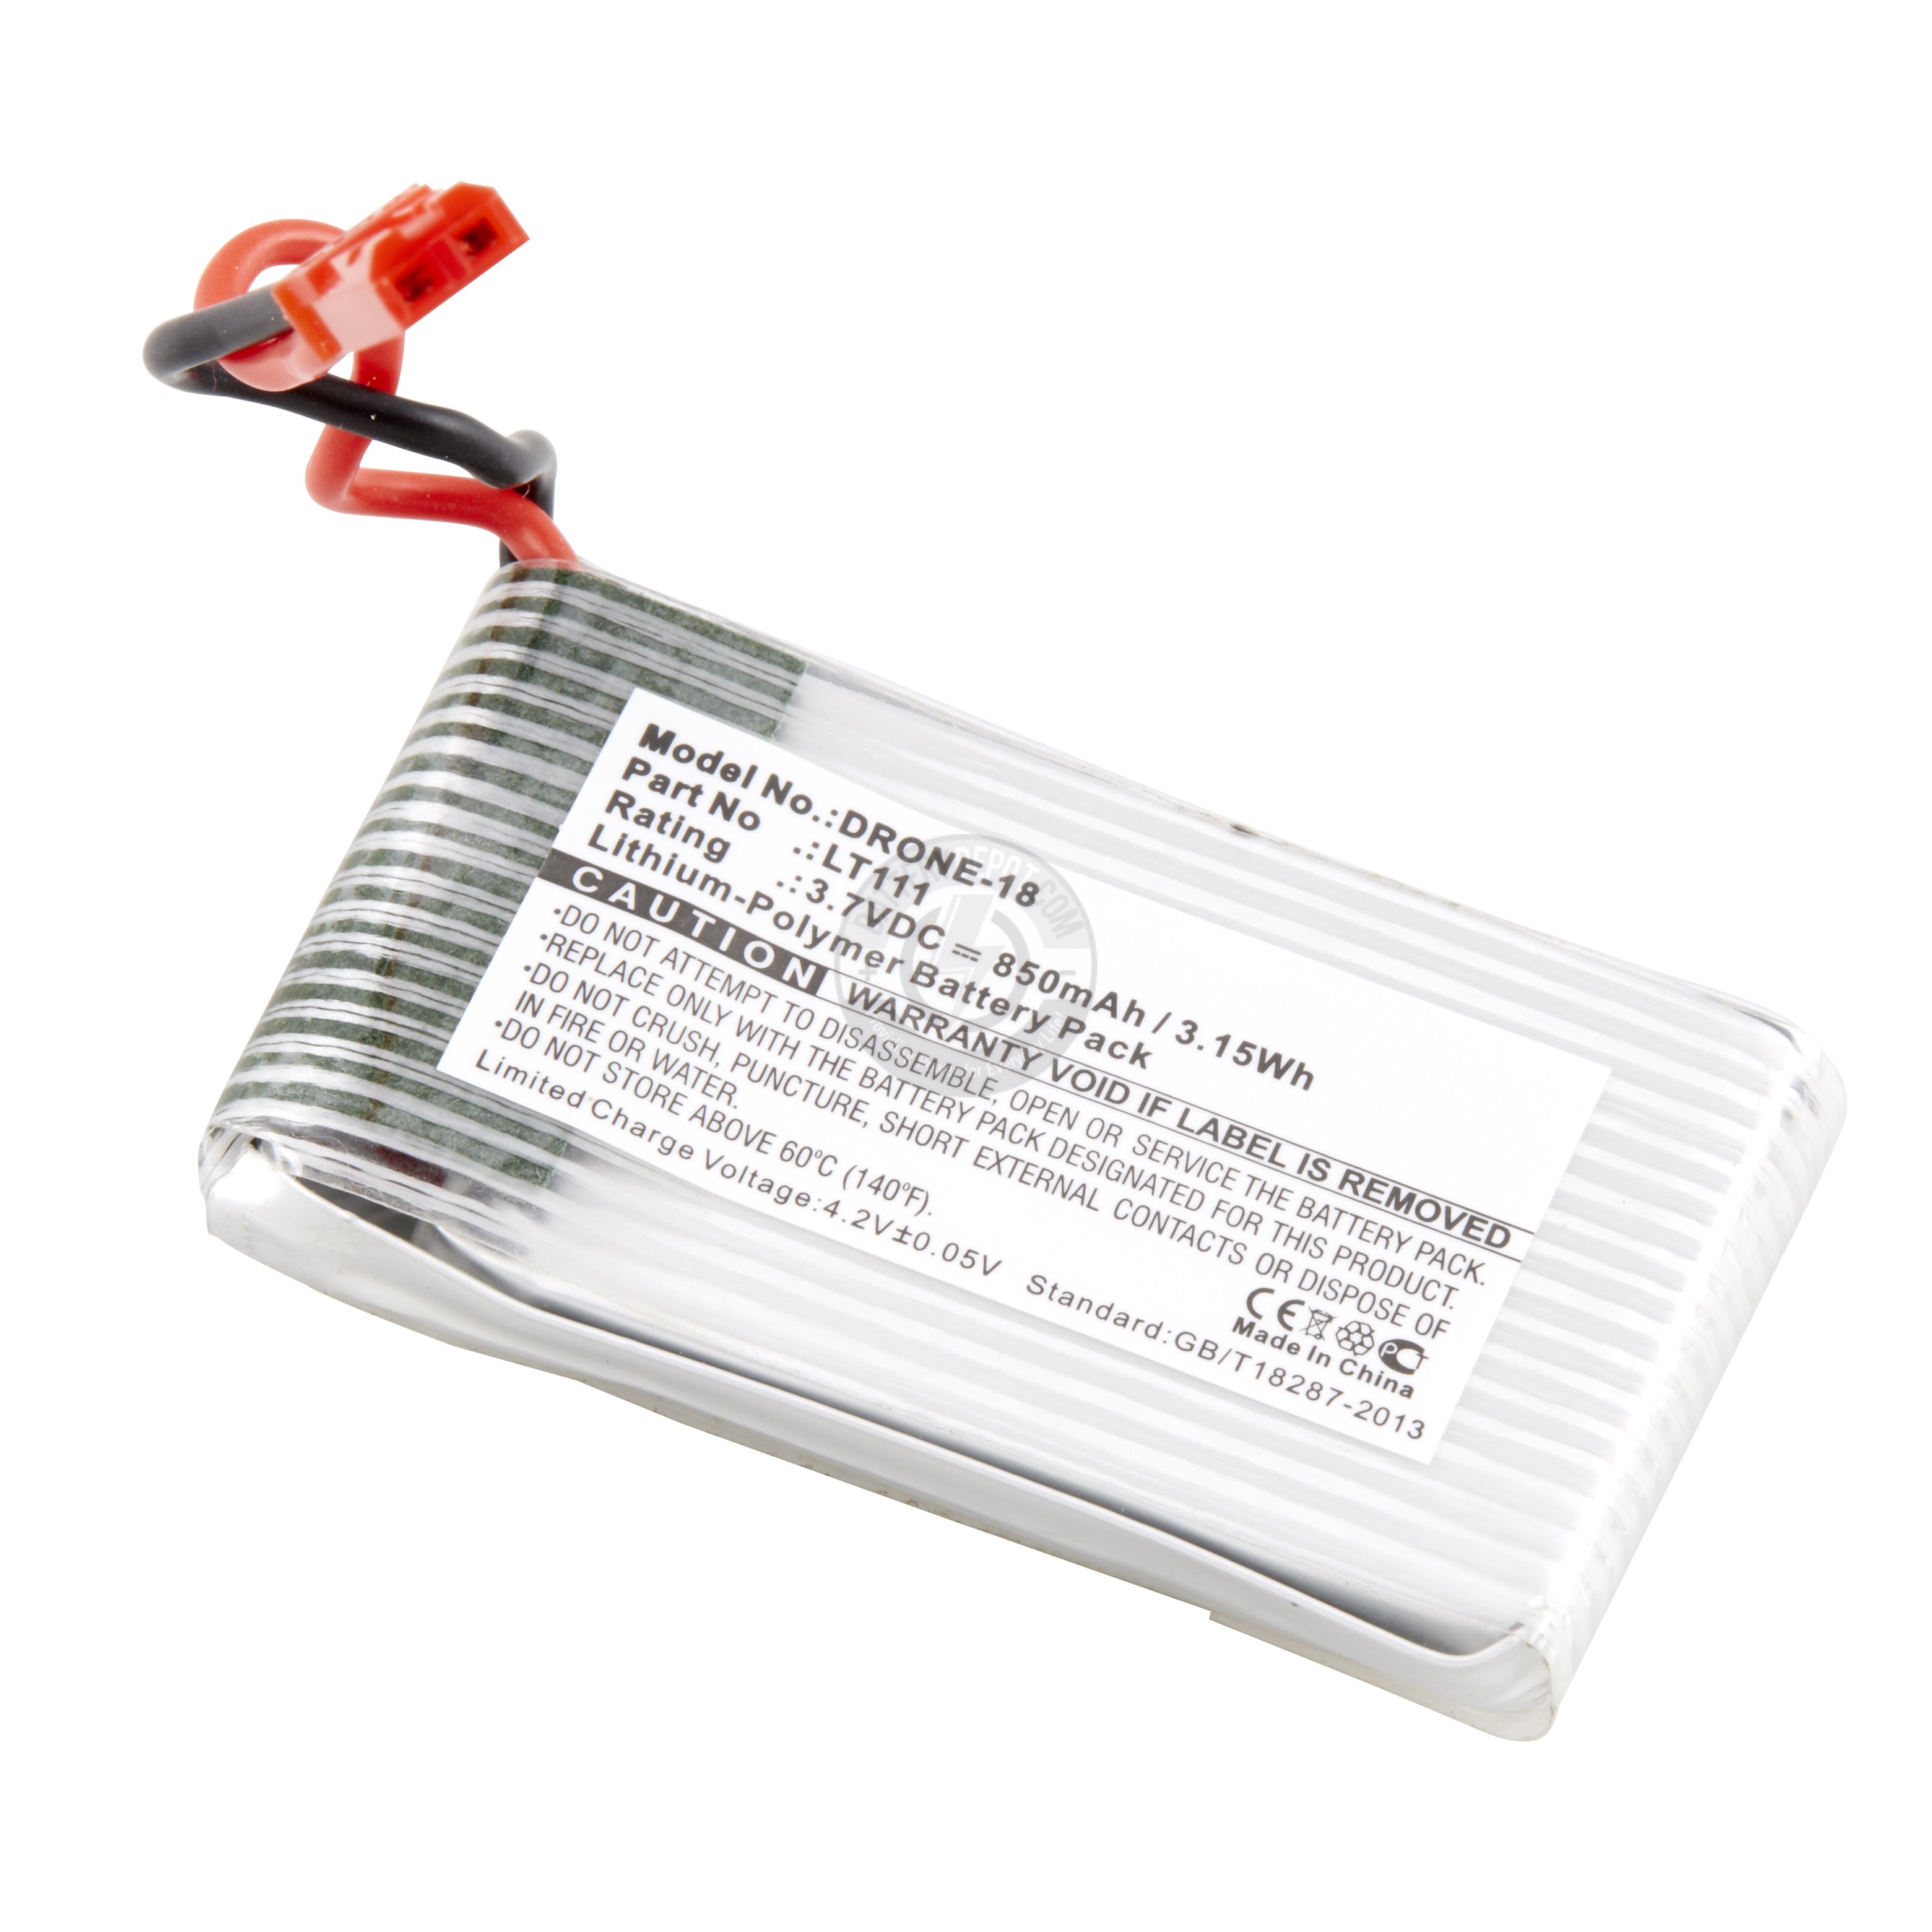 Replacement battery for Sky Hawkeye drones